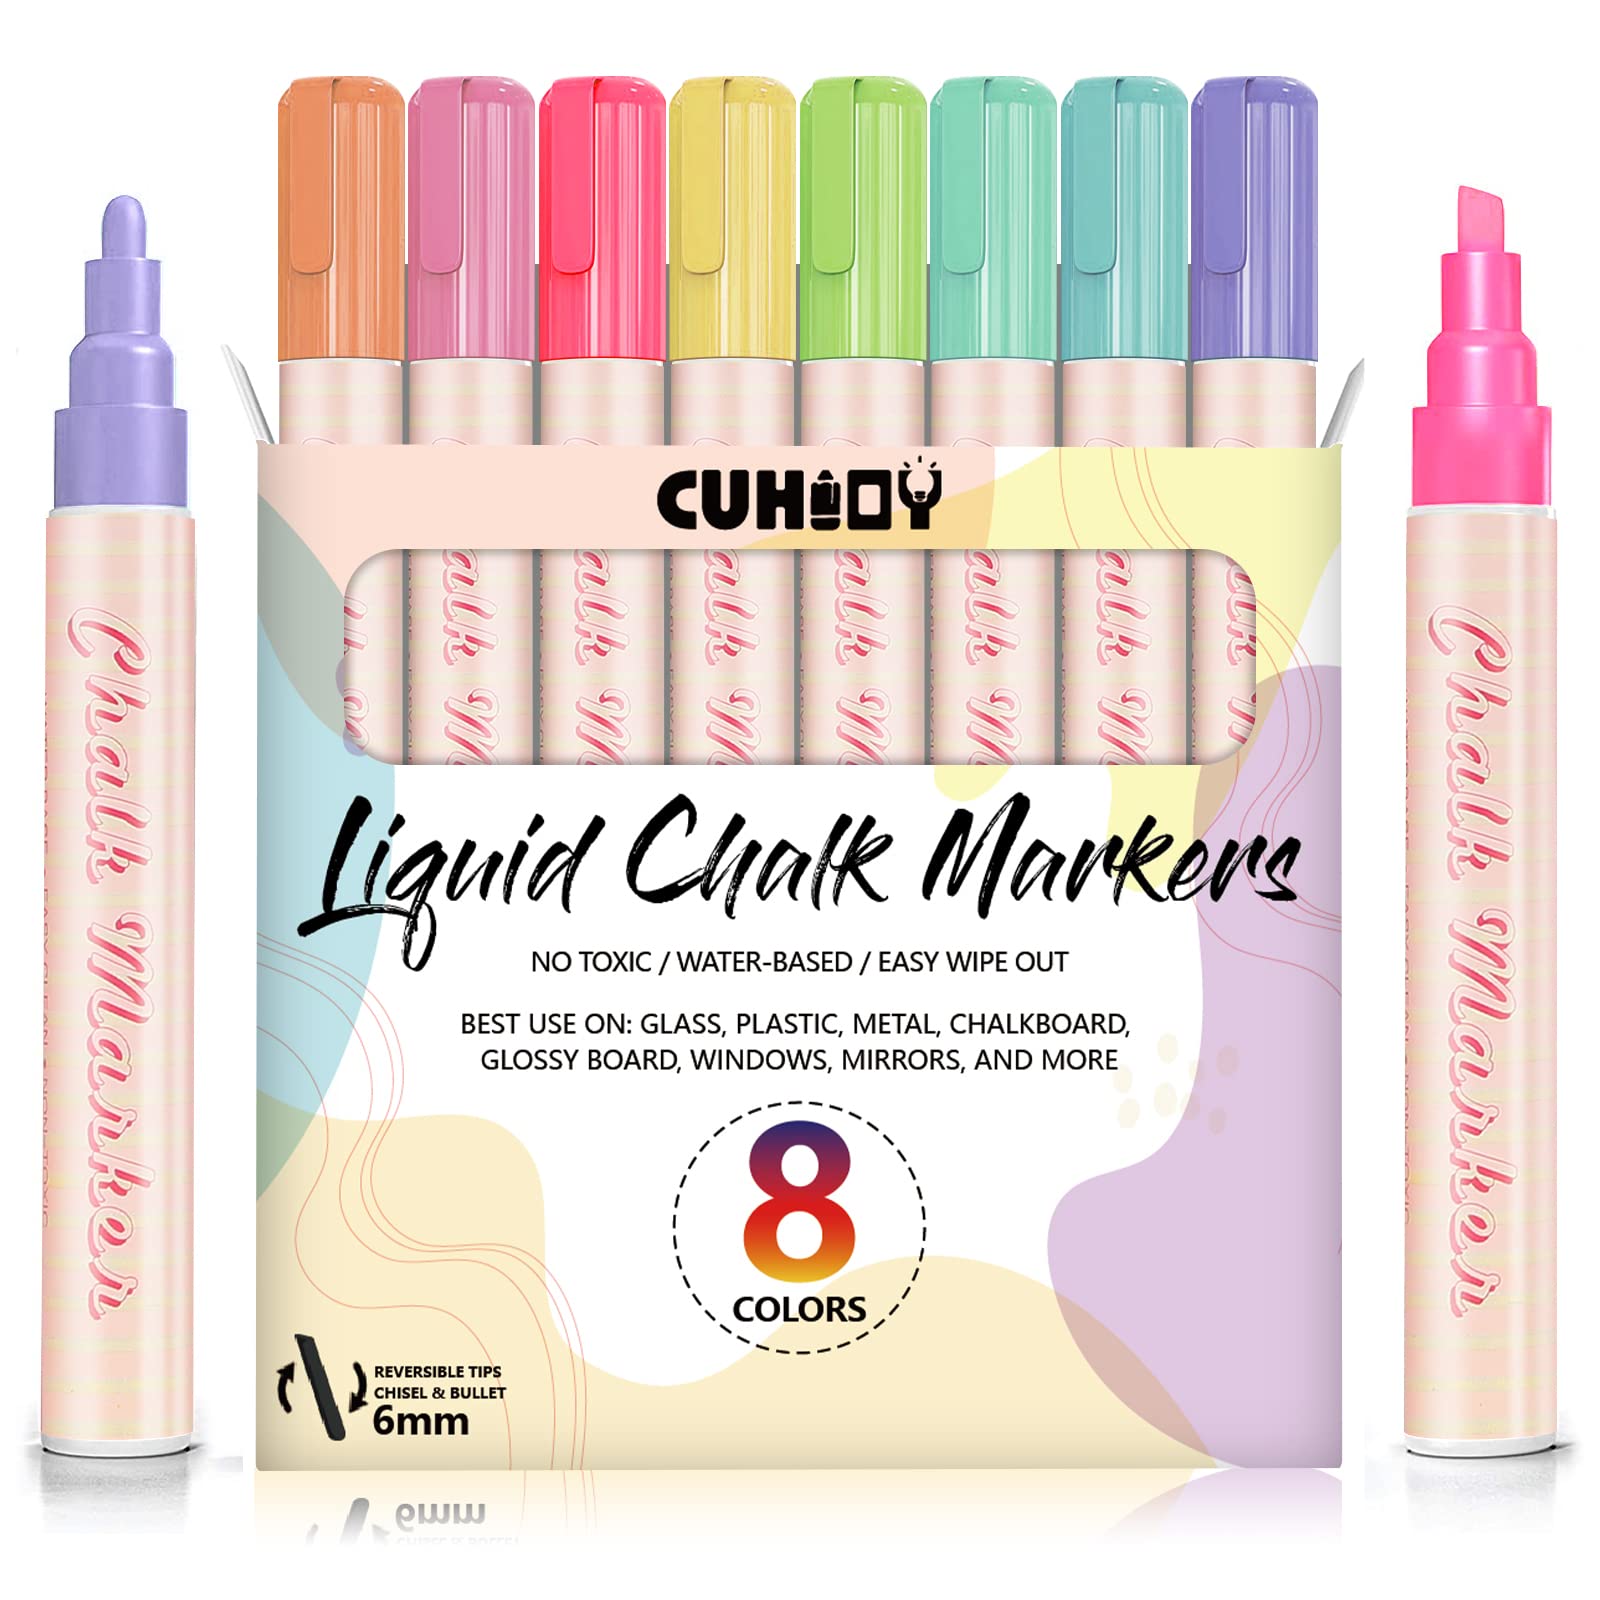 Cohas Wet-Wipe 5 Pastel Color Liquid Chalk Markers with Reversible Tips